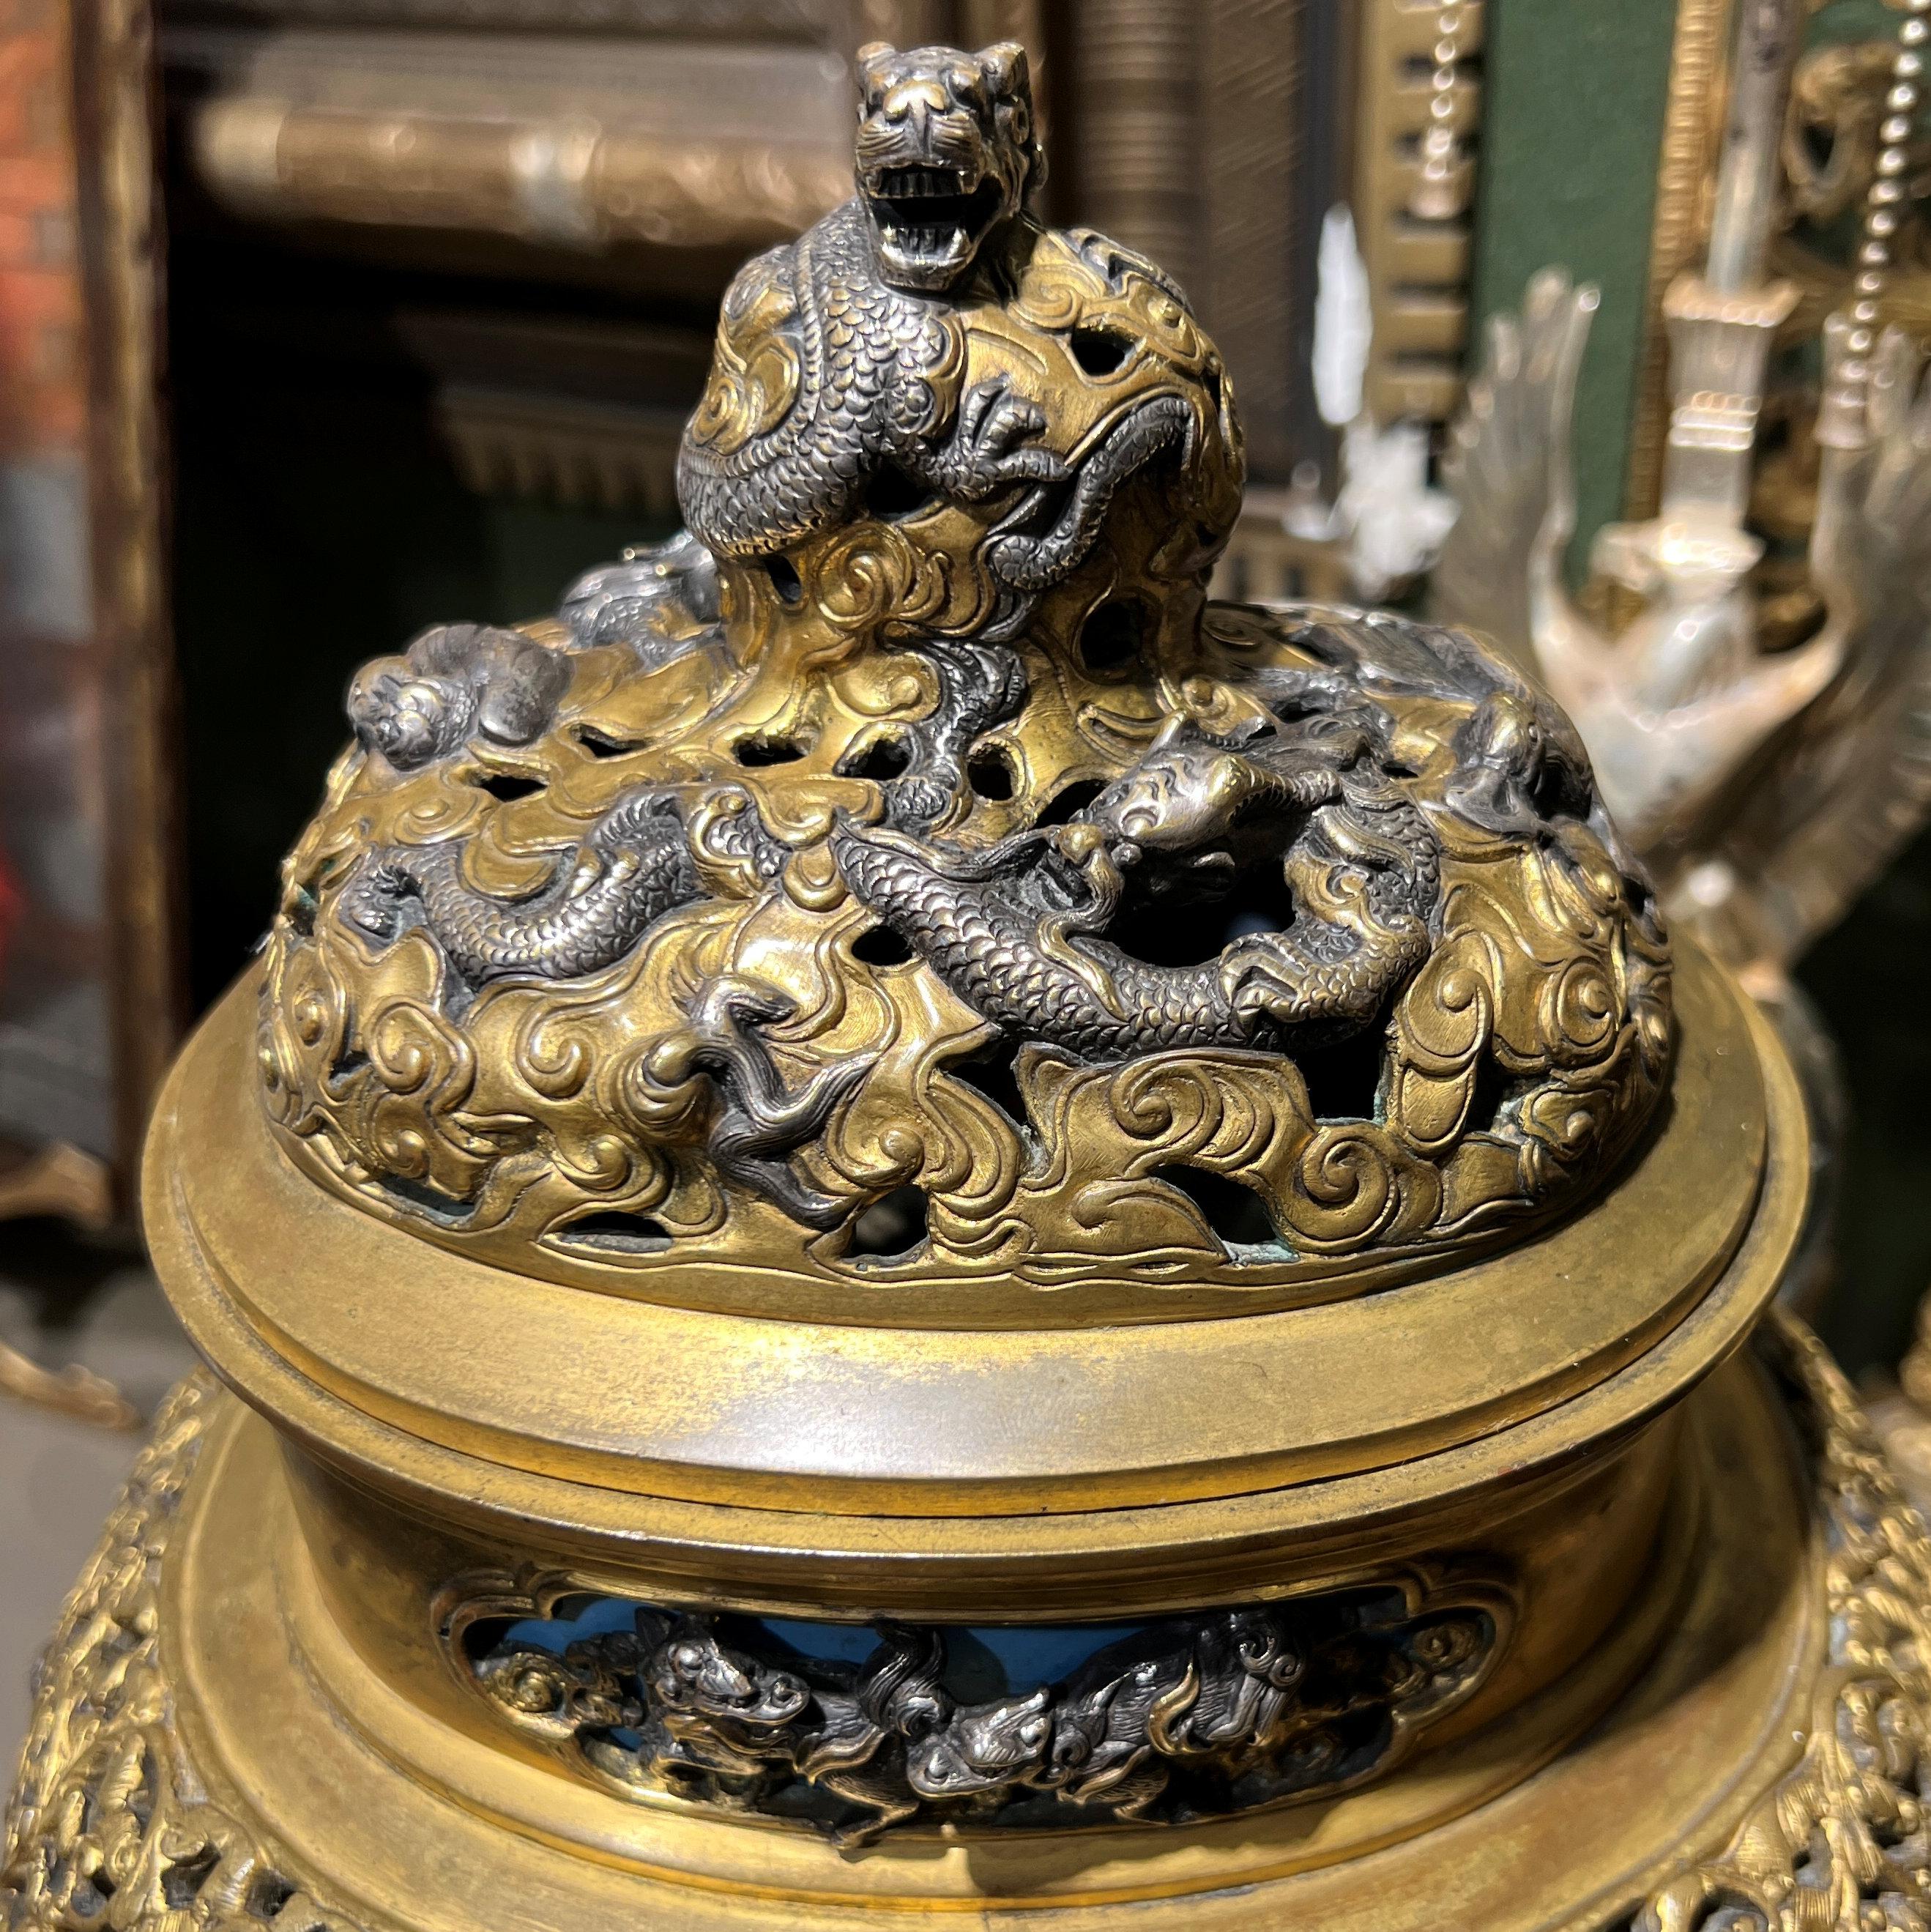 Our mantel clock and candelabra with silvered, gilt and cloisonne enamel surfaces in the French Japonisme style dates from the 1870s and is in good condition. Attributed to the influential and revered designer, Edouard Lievre (1828-1886), likely for